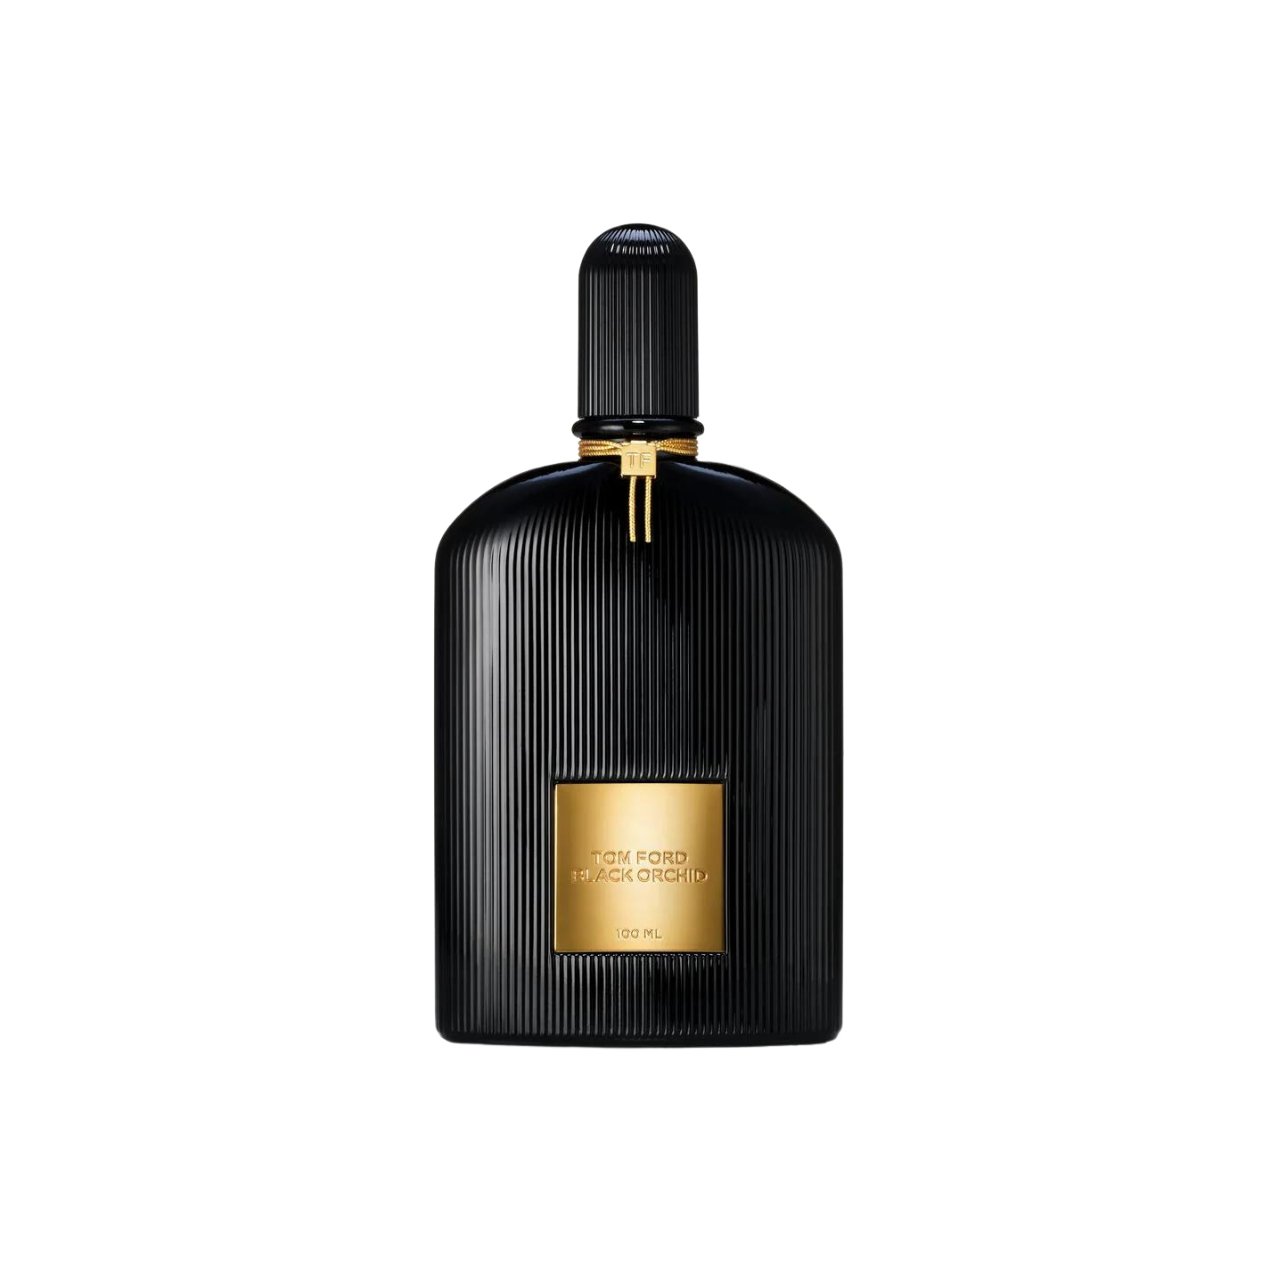 Tom Ford Black Orchid EDP - Niche Decant